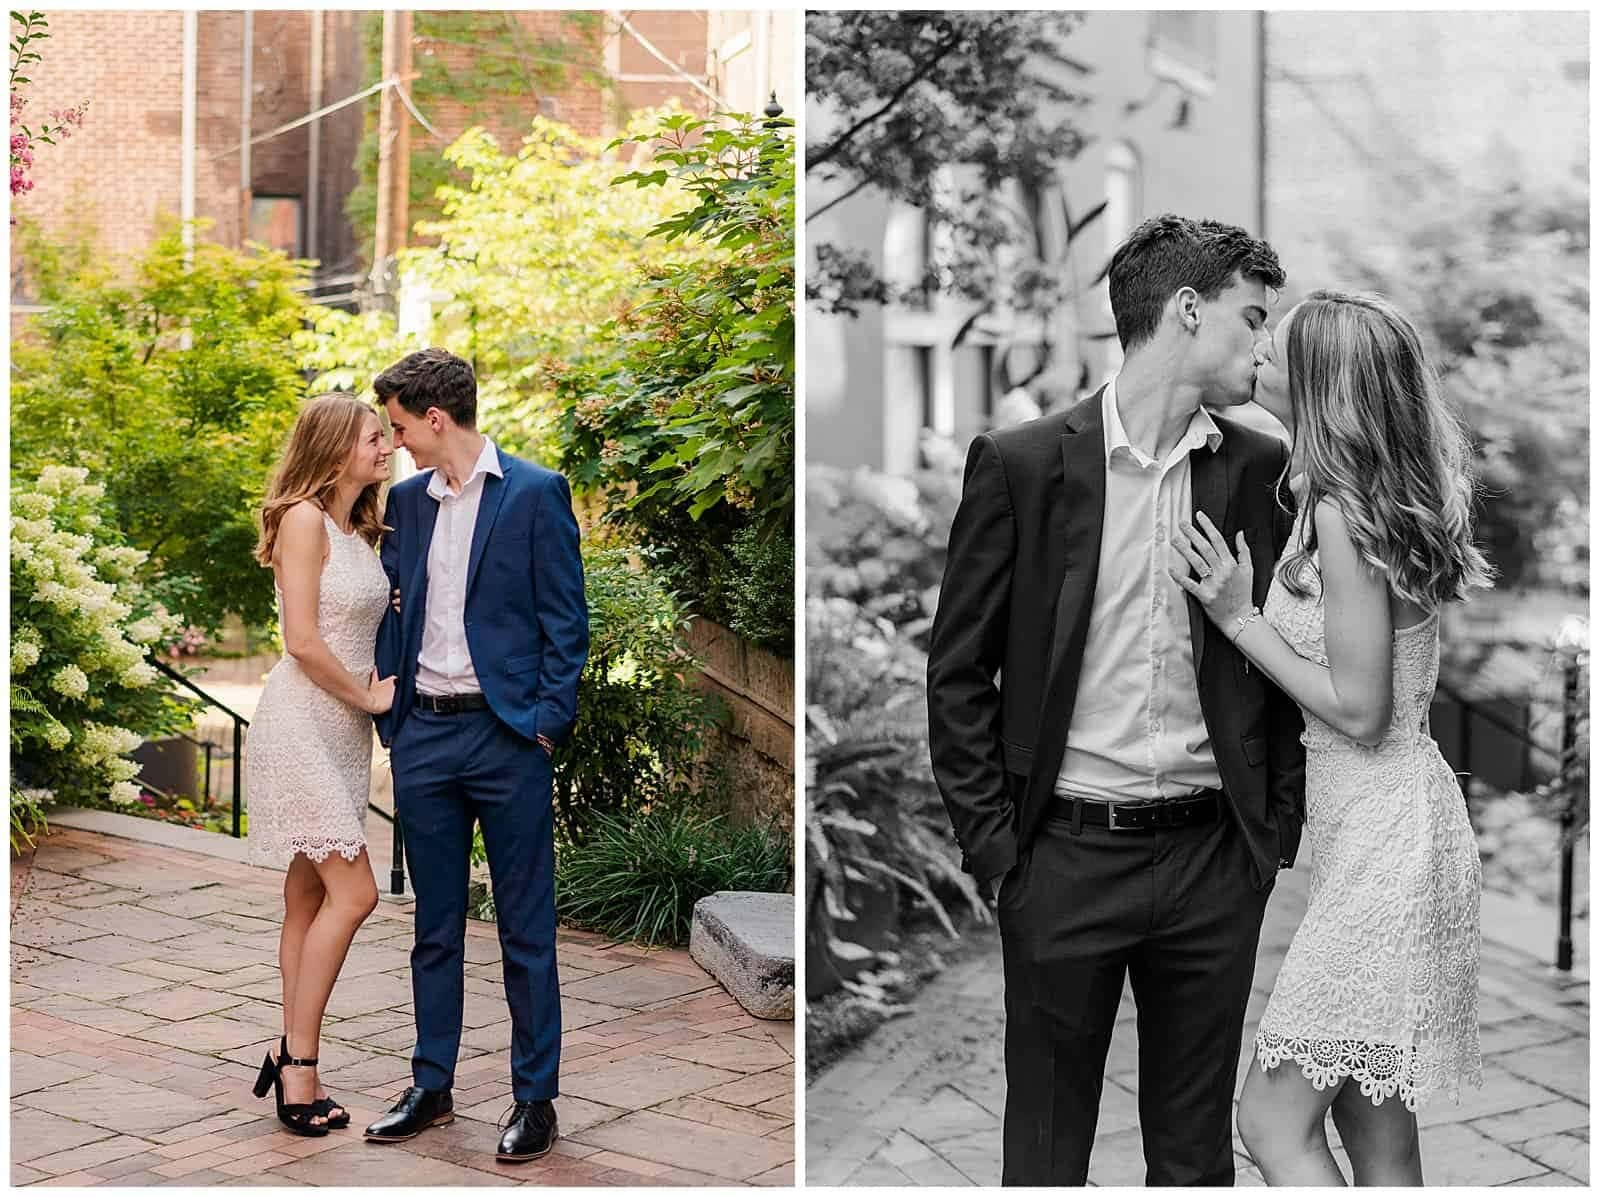 Collage of highlight images from elopement photography clients in downtown staunton virginia. Young couple is walking through downtown staunton, smiling, wearing blue suit and white sundress for their late summer elopement. 